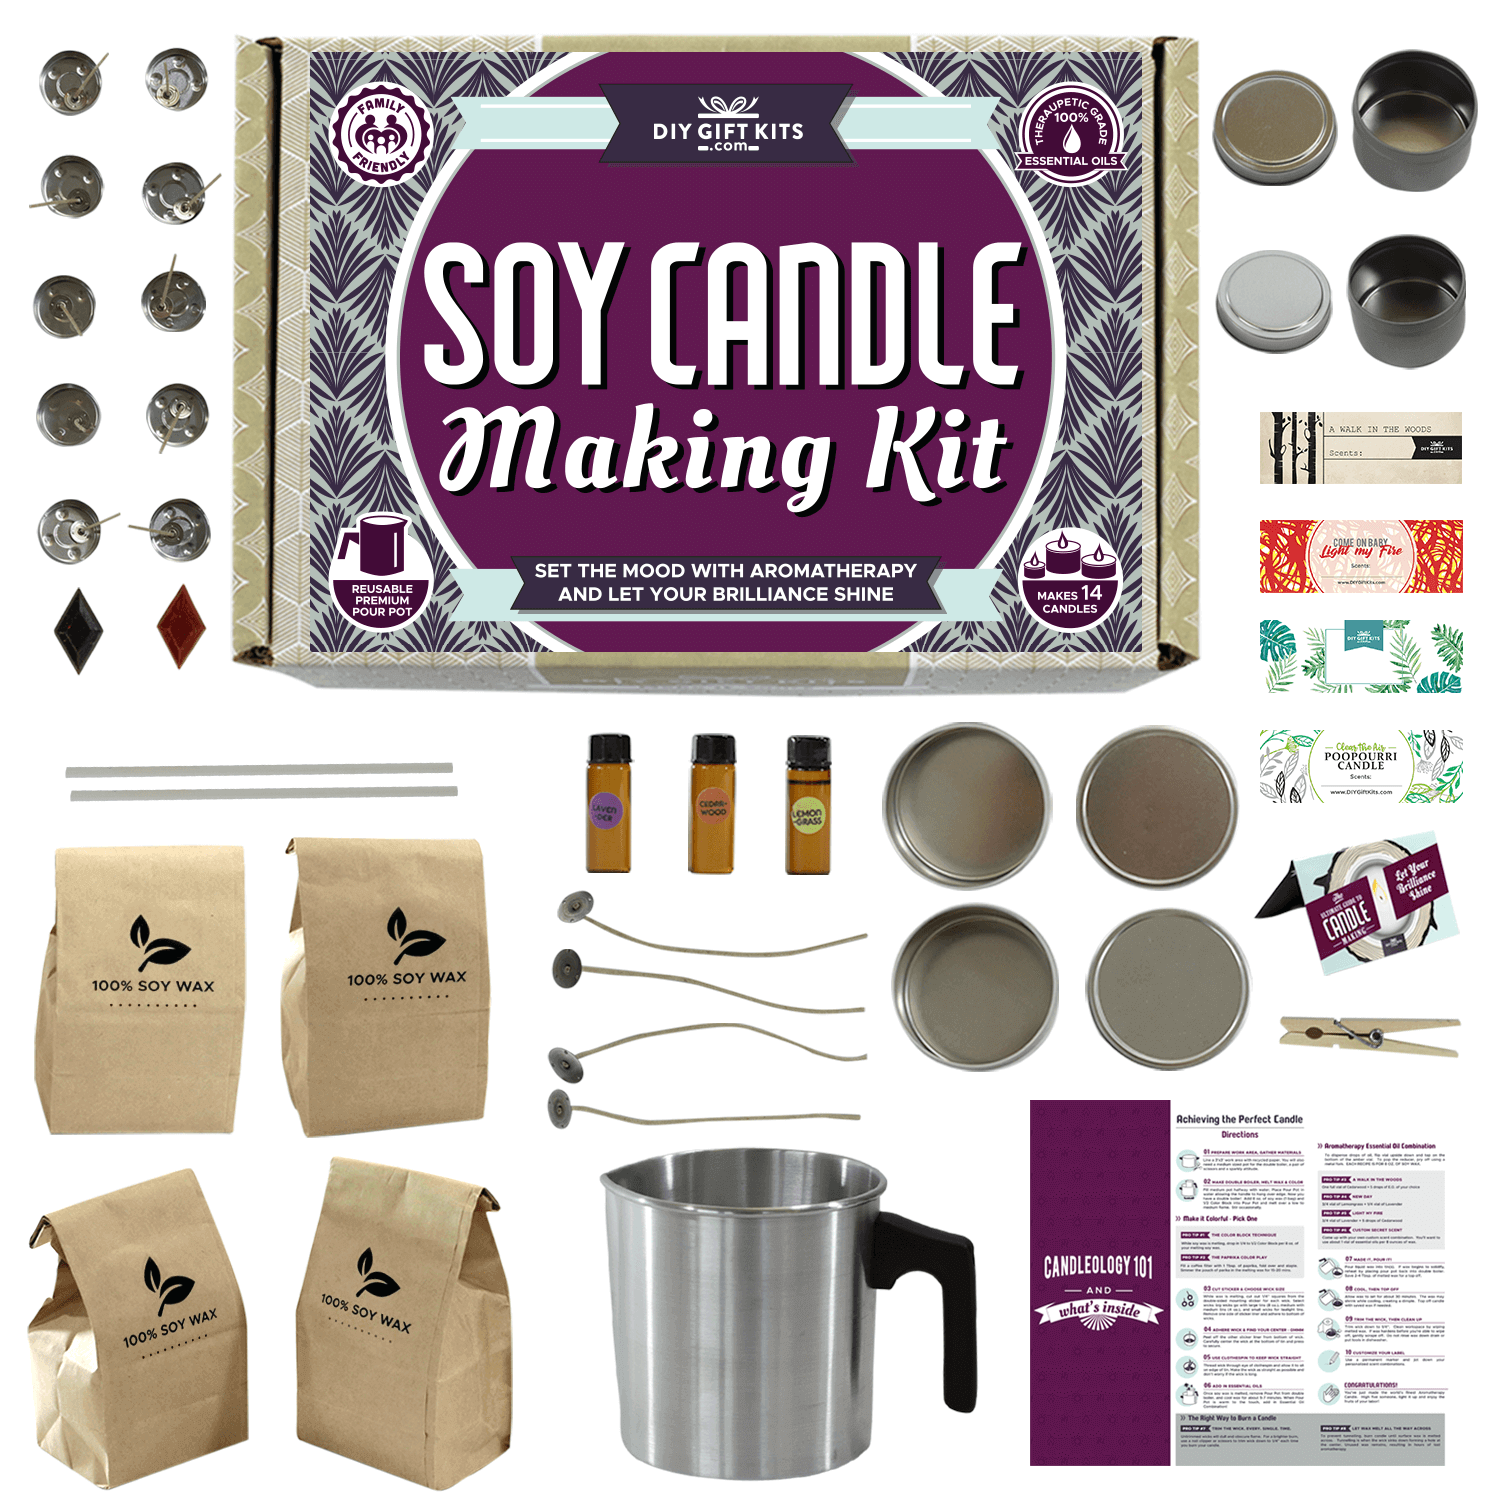 SAEUYVB candle making kit, full set - soy wax, candle wick, stirring spoon,  4.4 oz candle jar